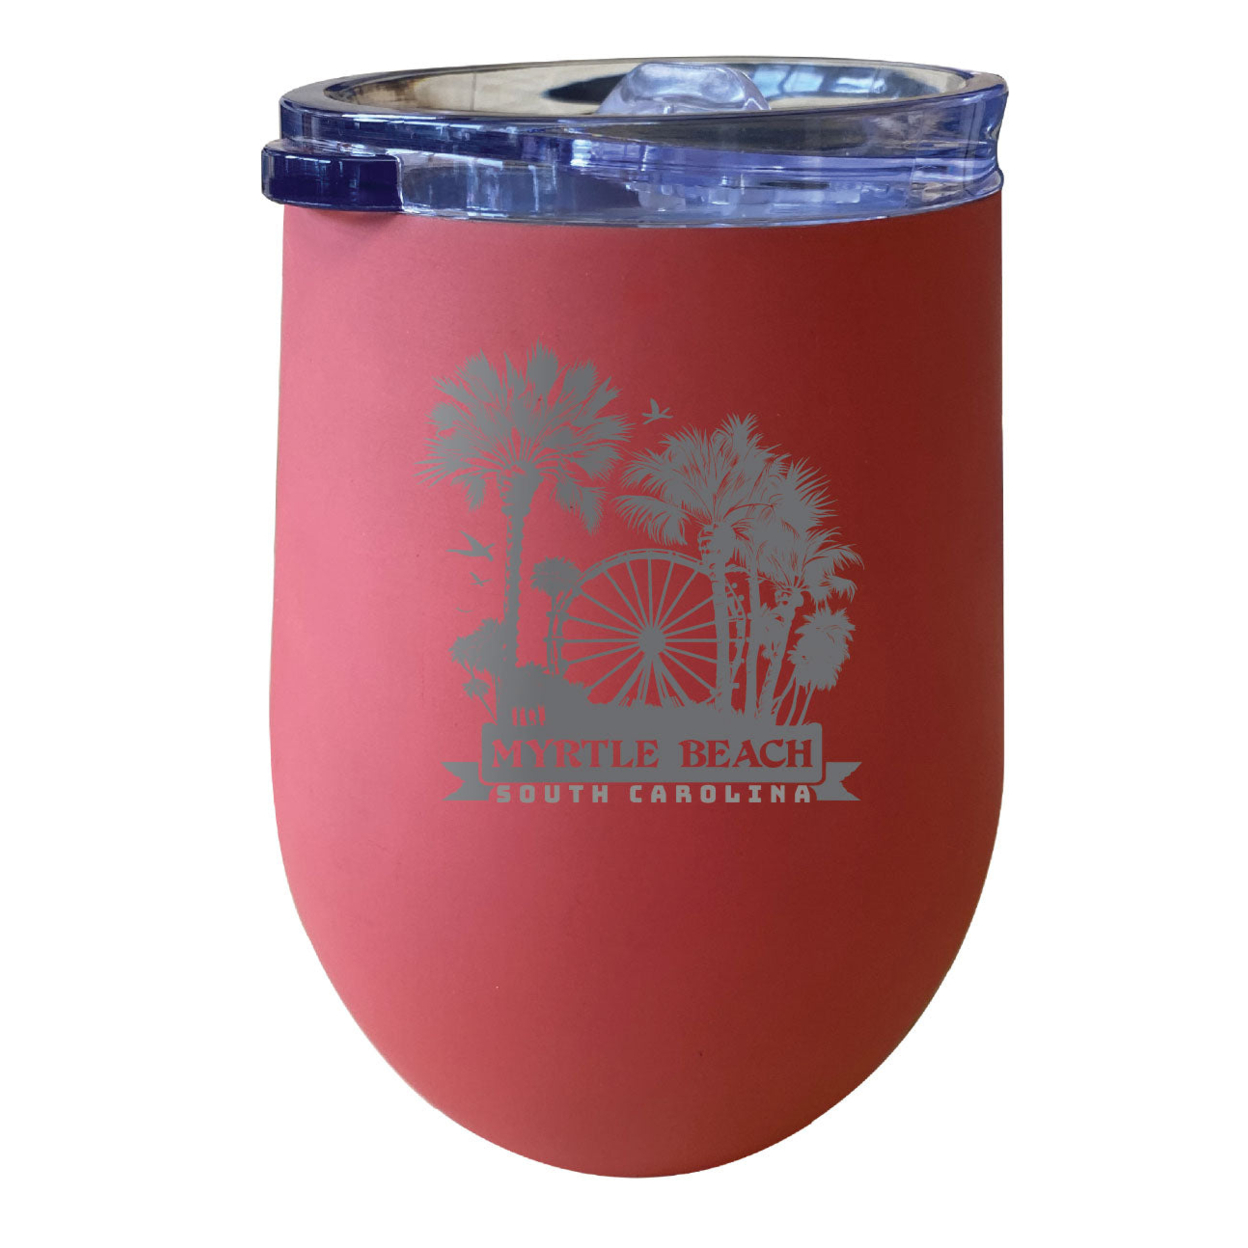 Myrtle Beach South Carolina Laser Etched Souvenir 12 Oz Insulated Wine Stainless Steel Tumbler - Gold